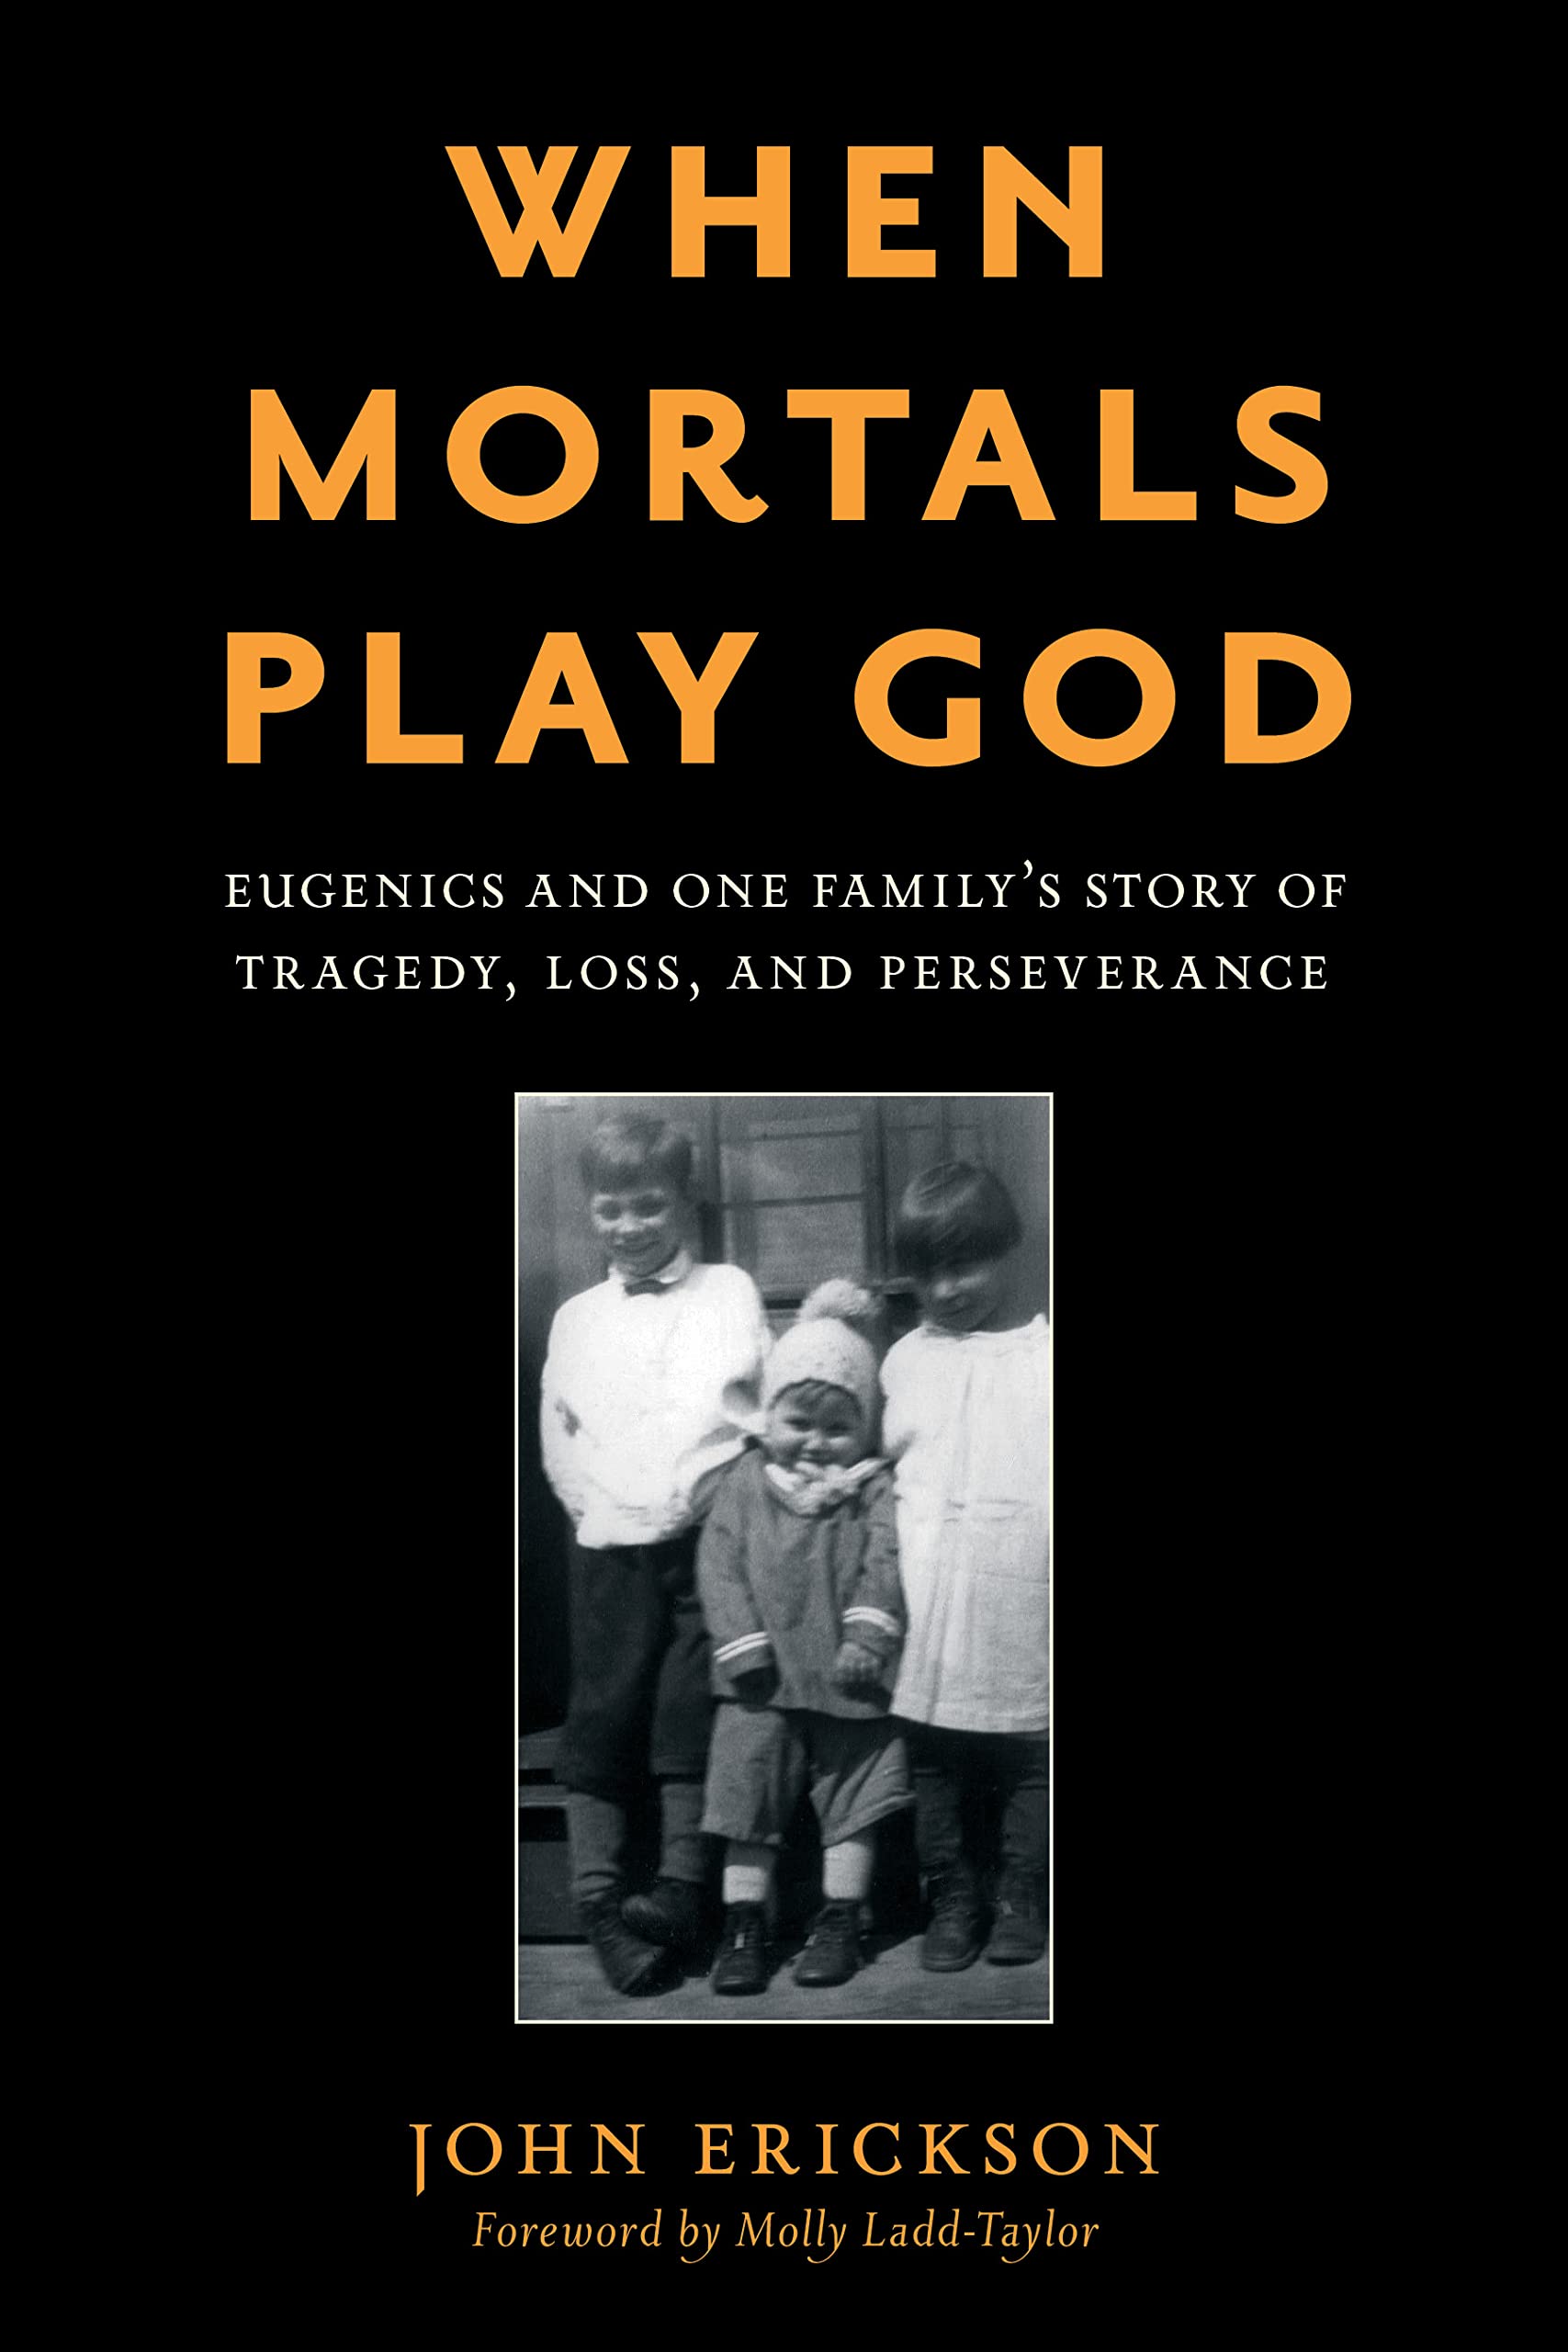 When Mortals Play God: Eugenics and One Family’s Story of Tragedy, Loss, and Perseverance